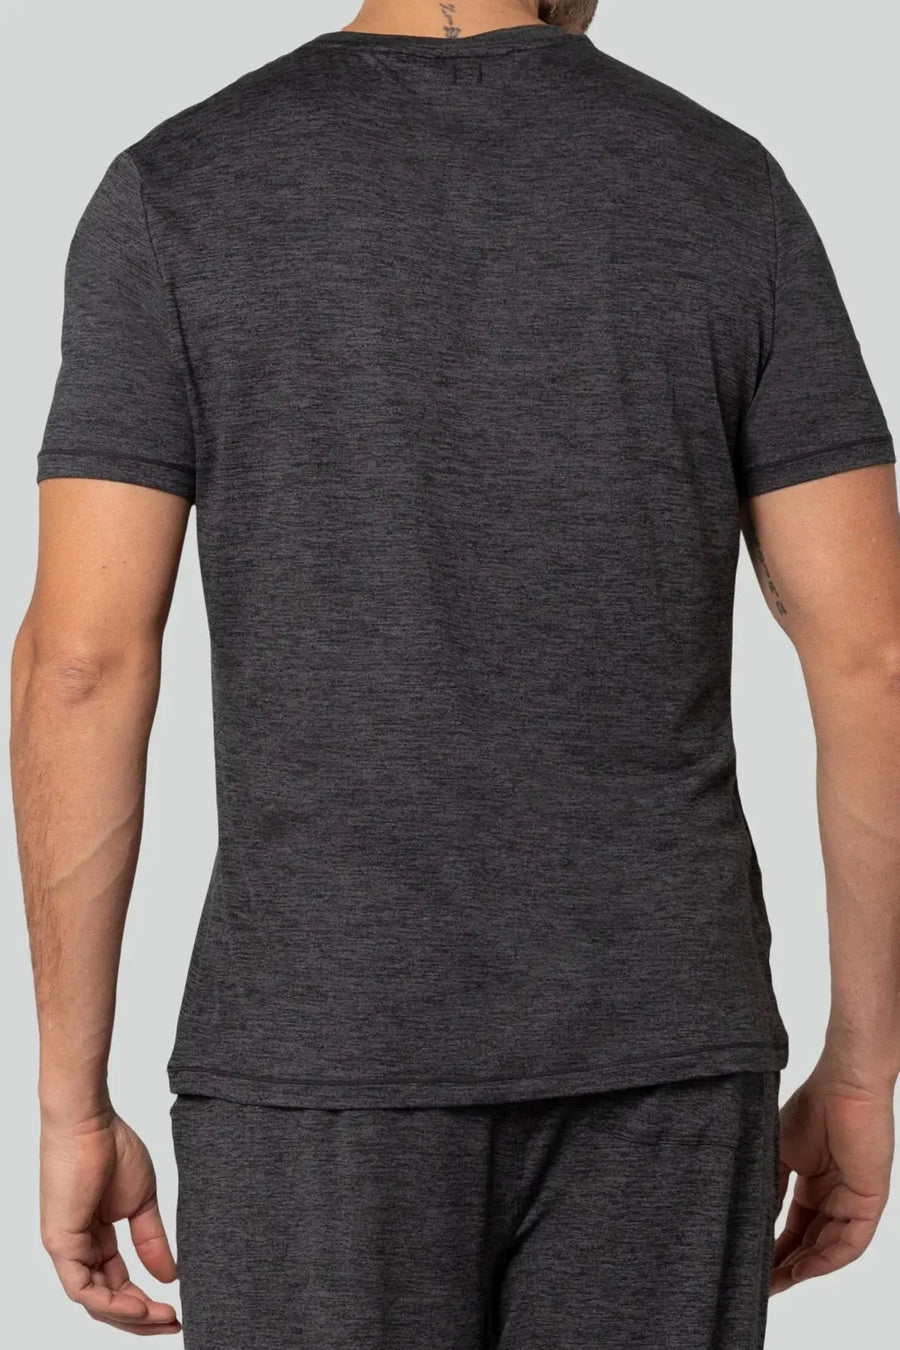 PURE & SIMPLE | V Neck T-Shirt Black Heather Pure & Simple